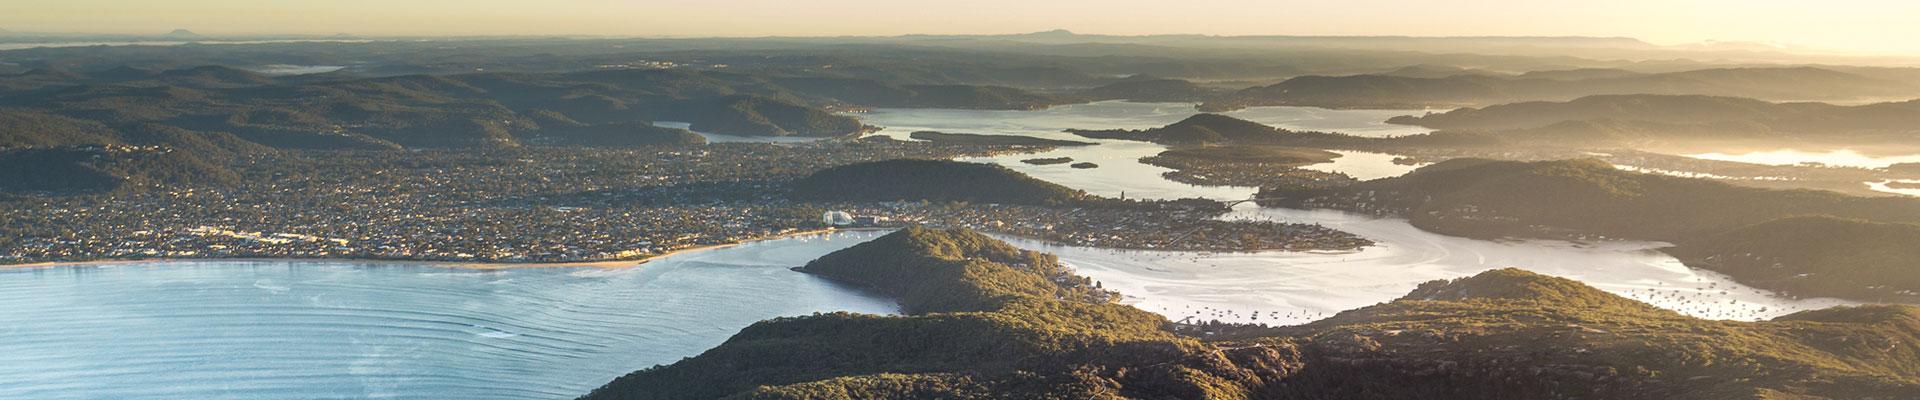 Implementation of the Coastal Zone Management Plan for Gosford's Lagoons